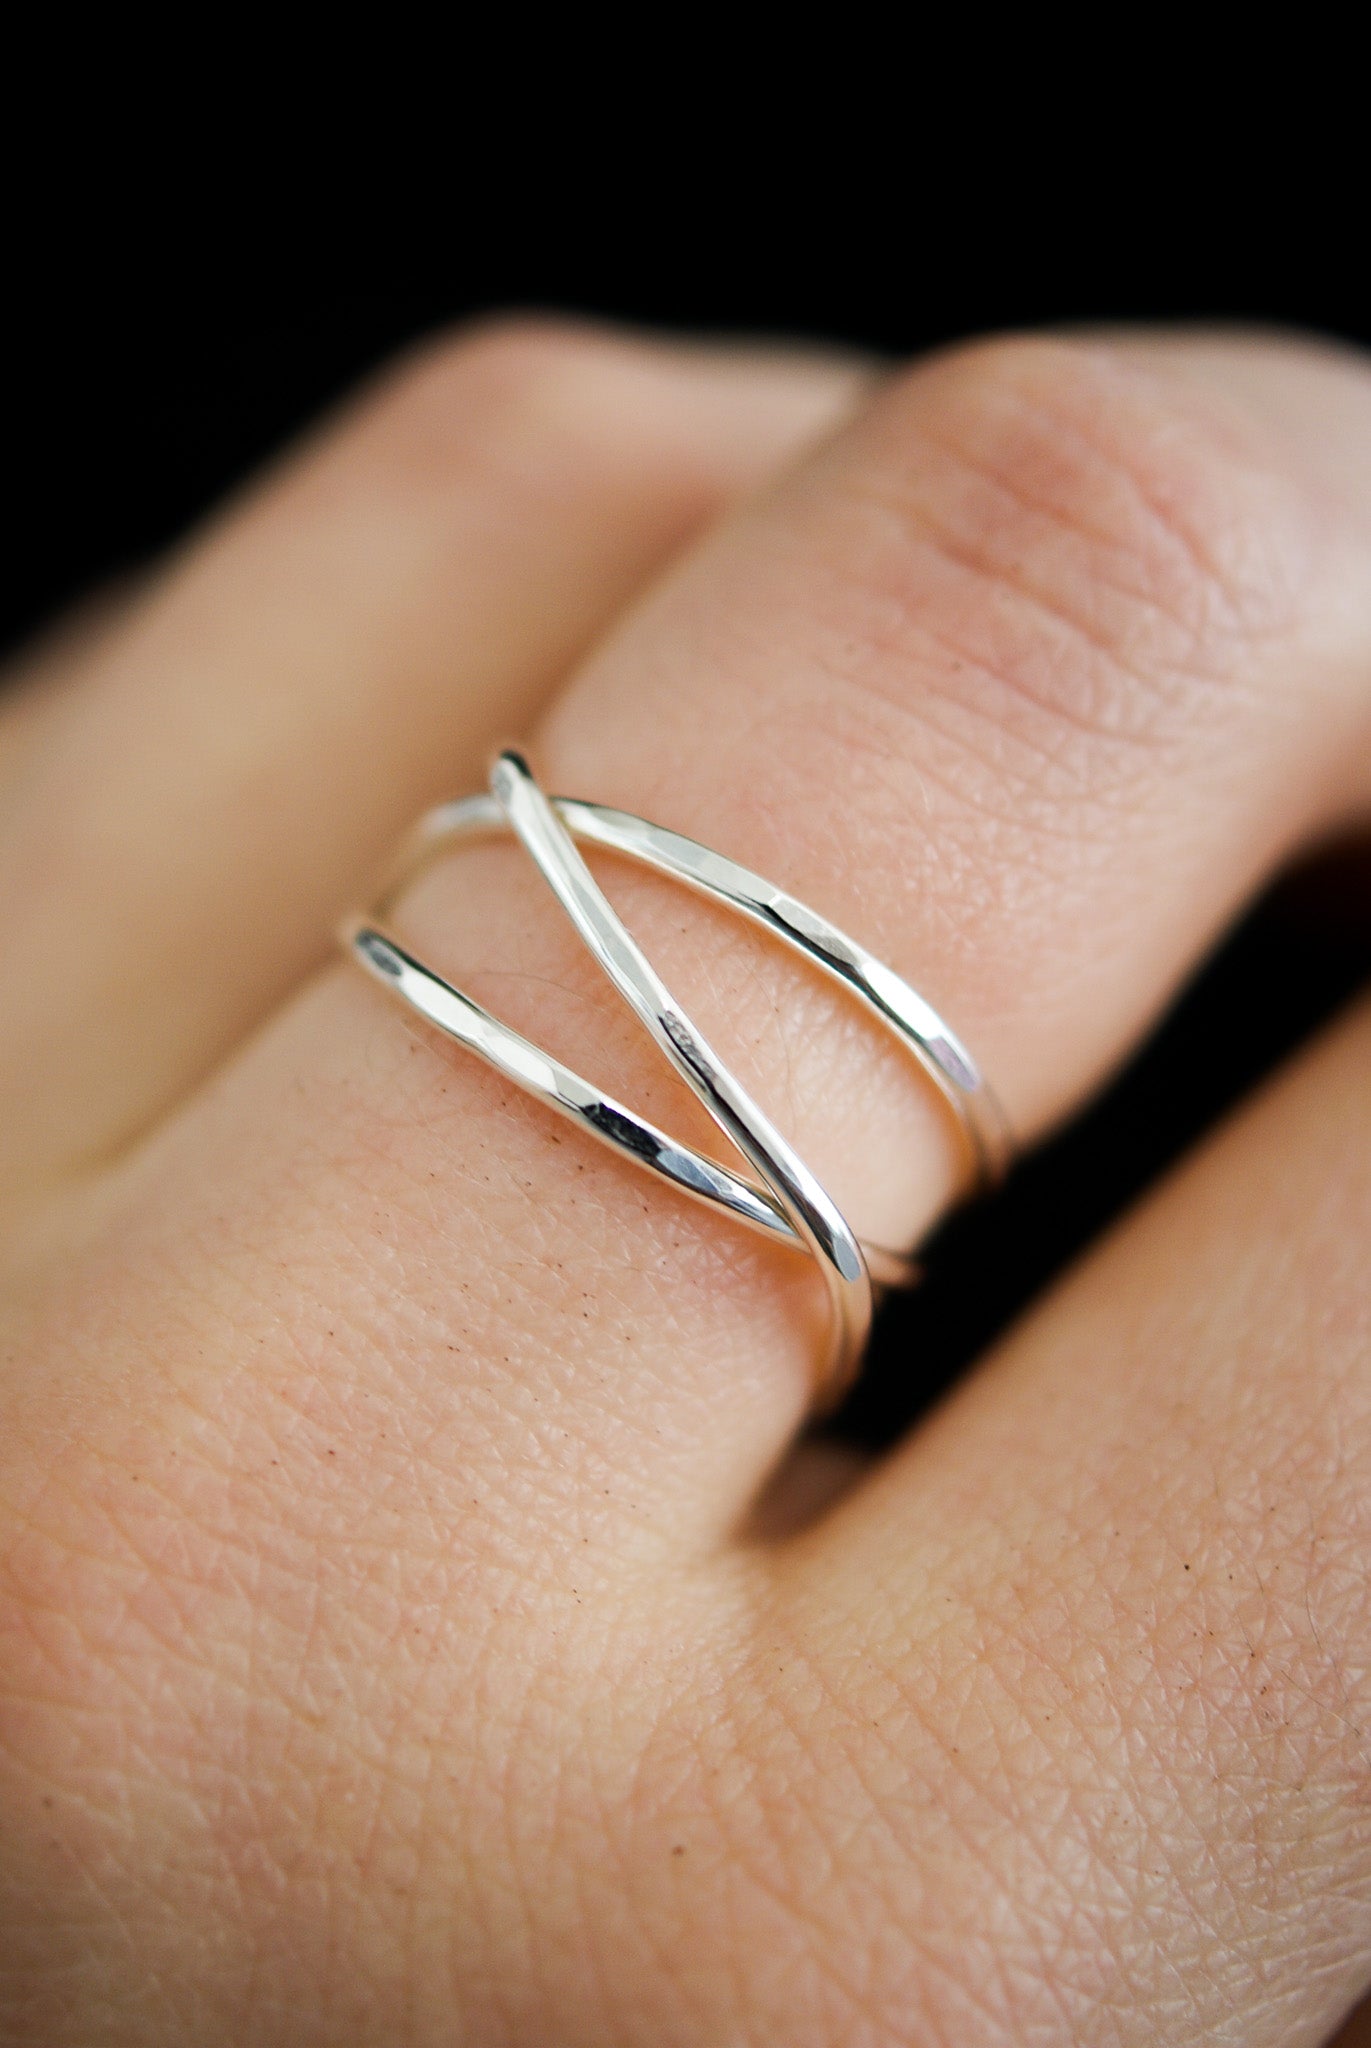 Wraparound Ring, Sterling Silver